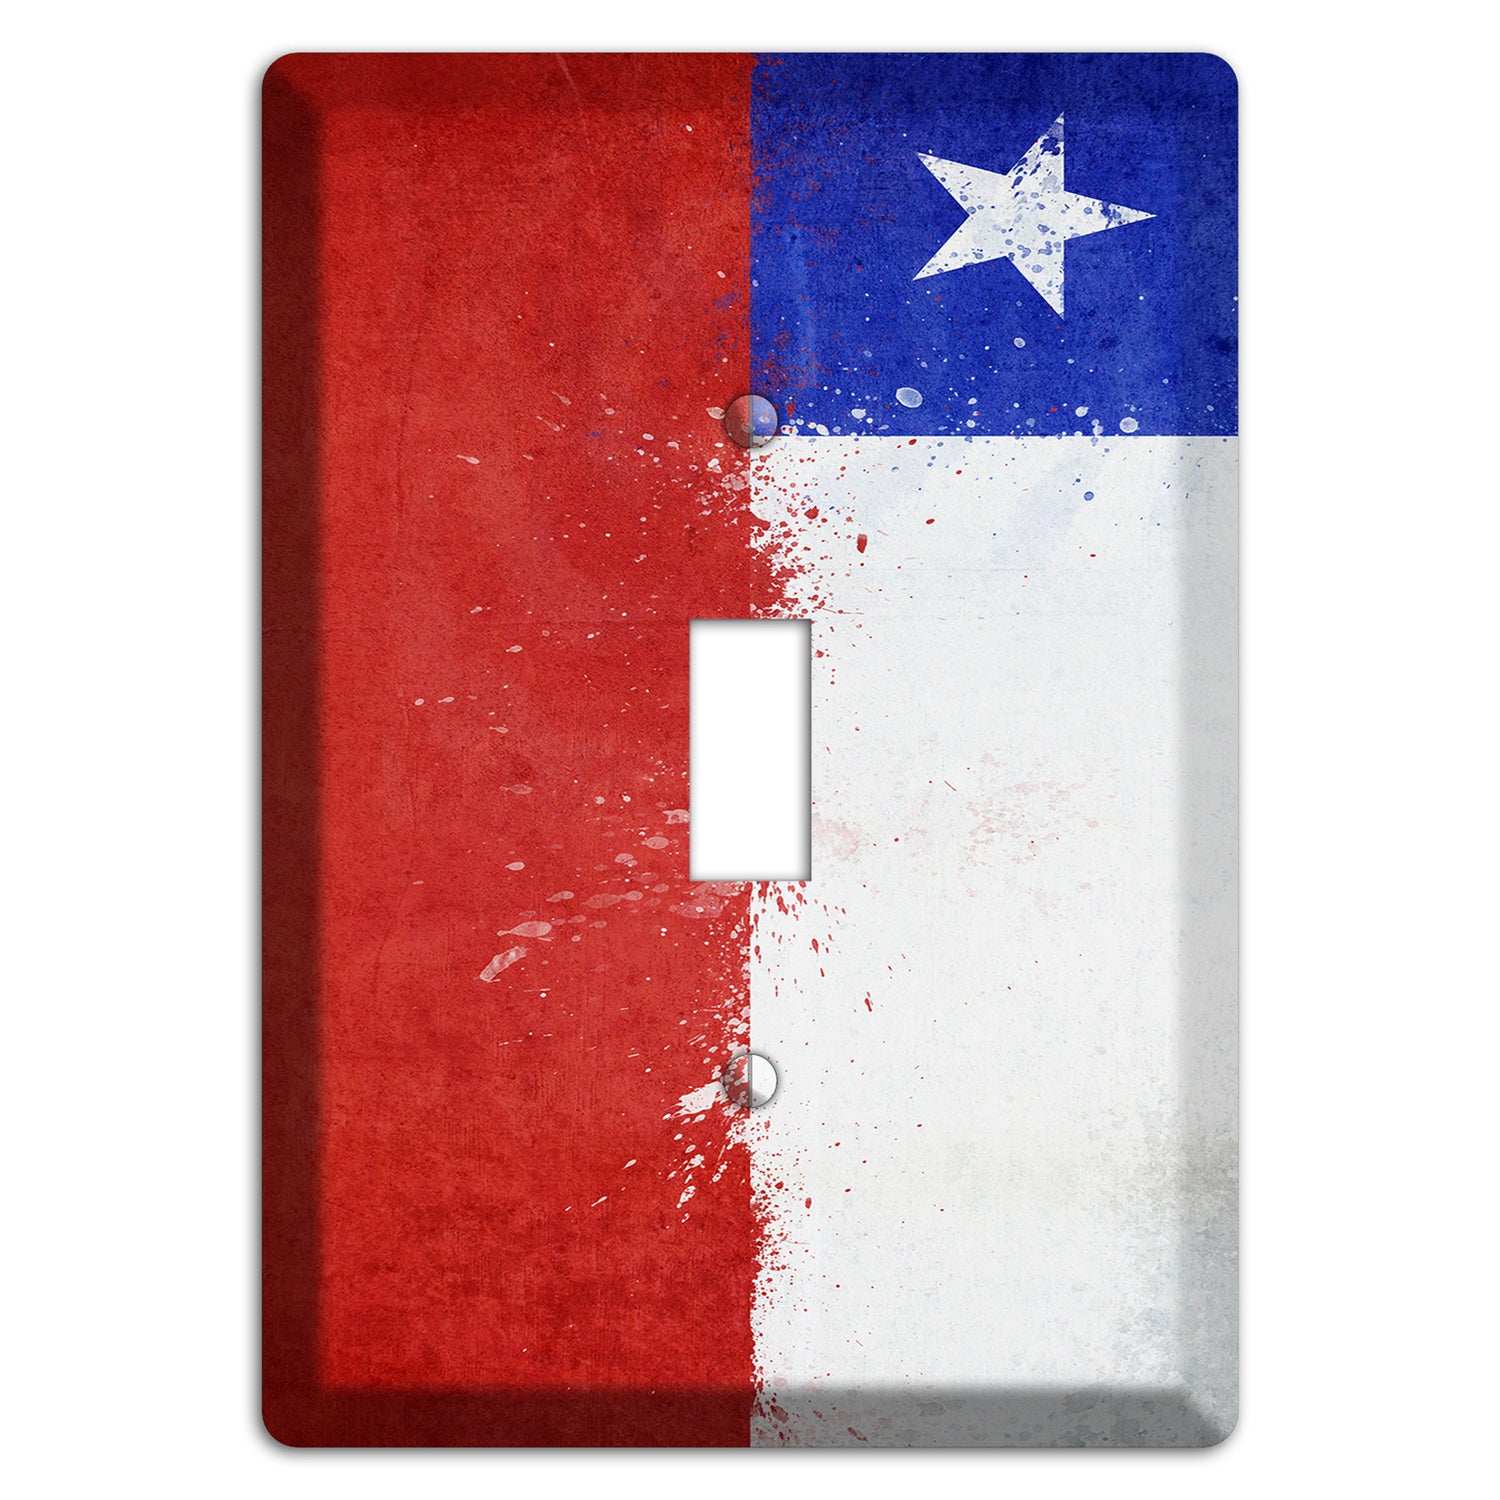 Chile Cover Plates Cover Plates